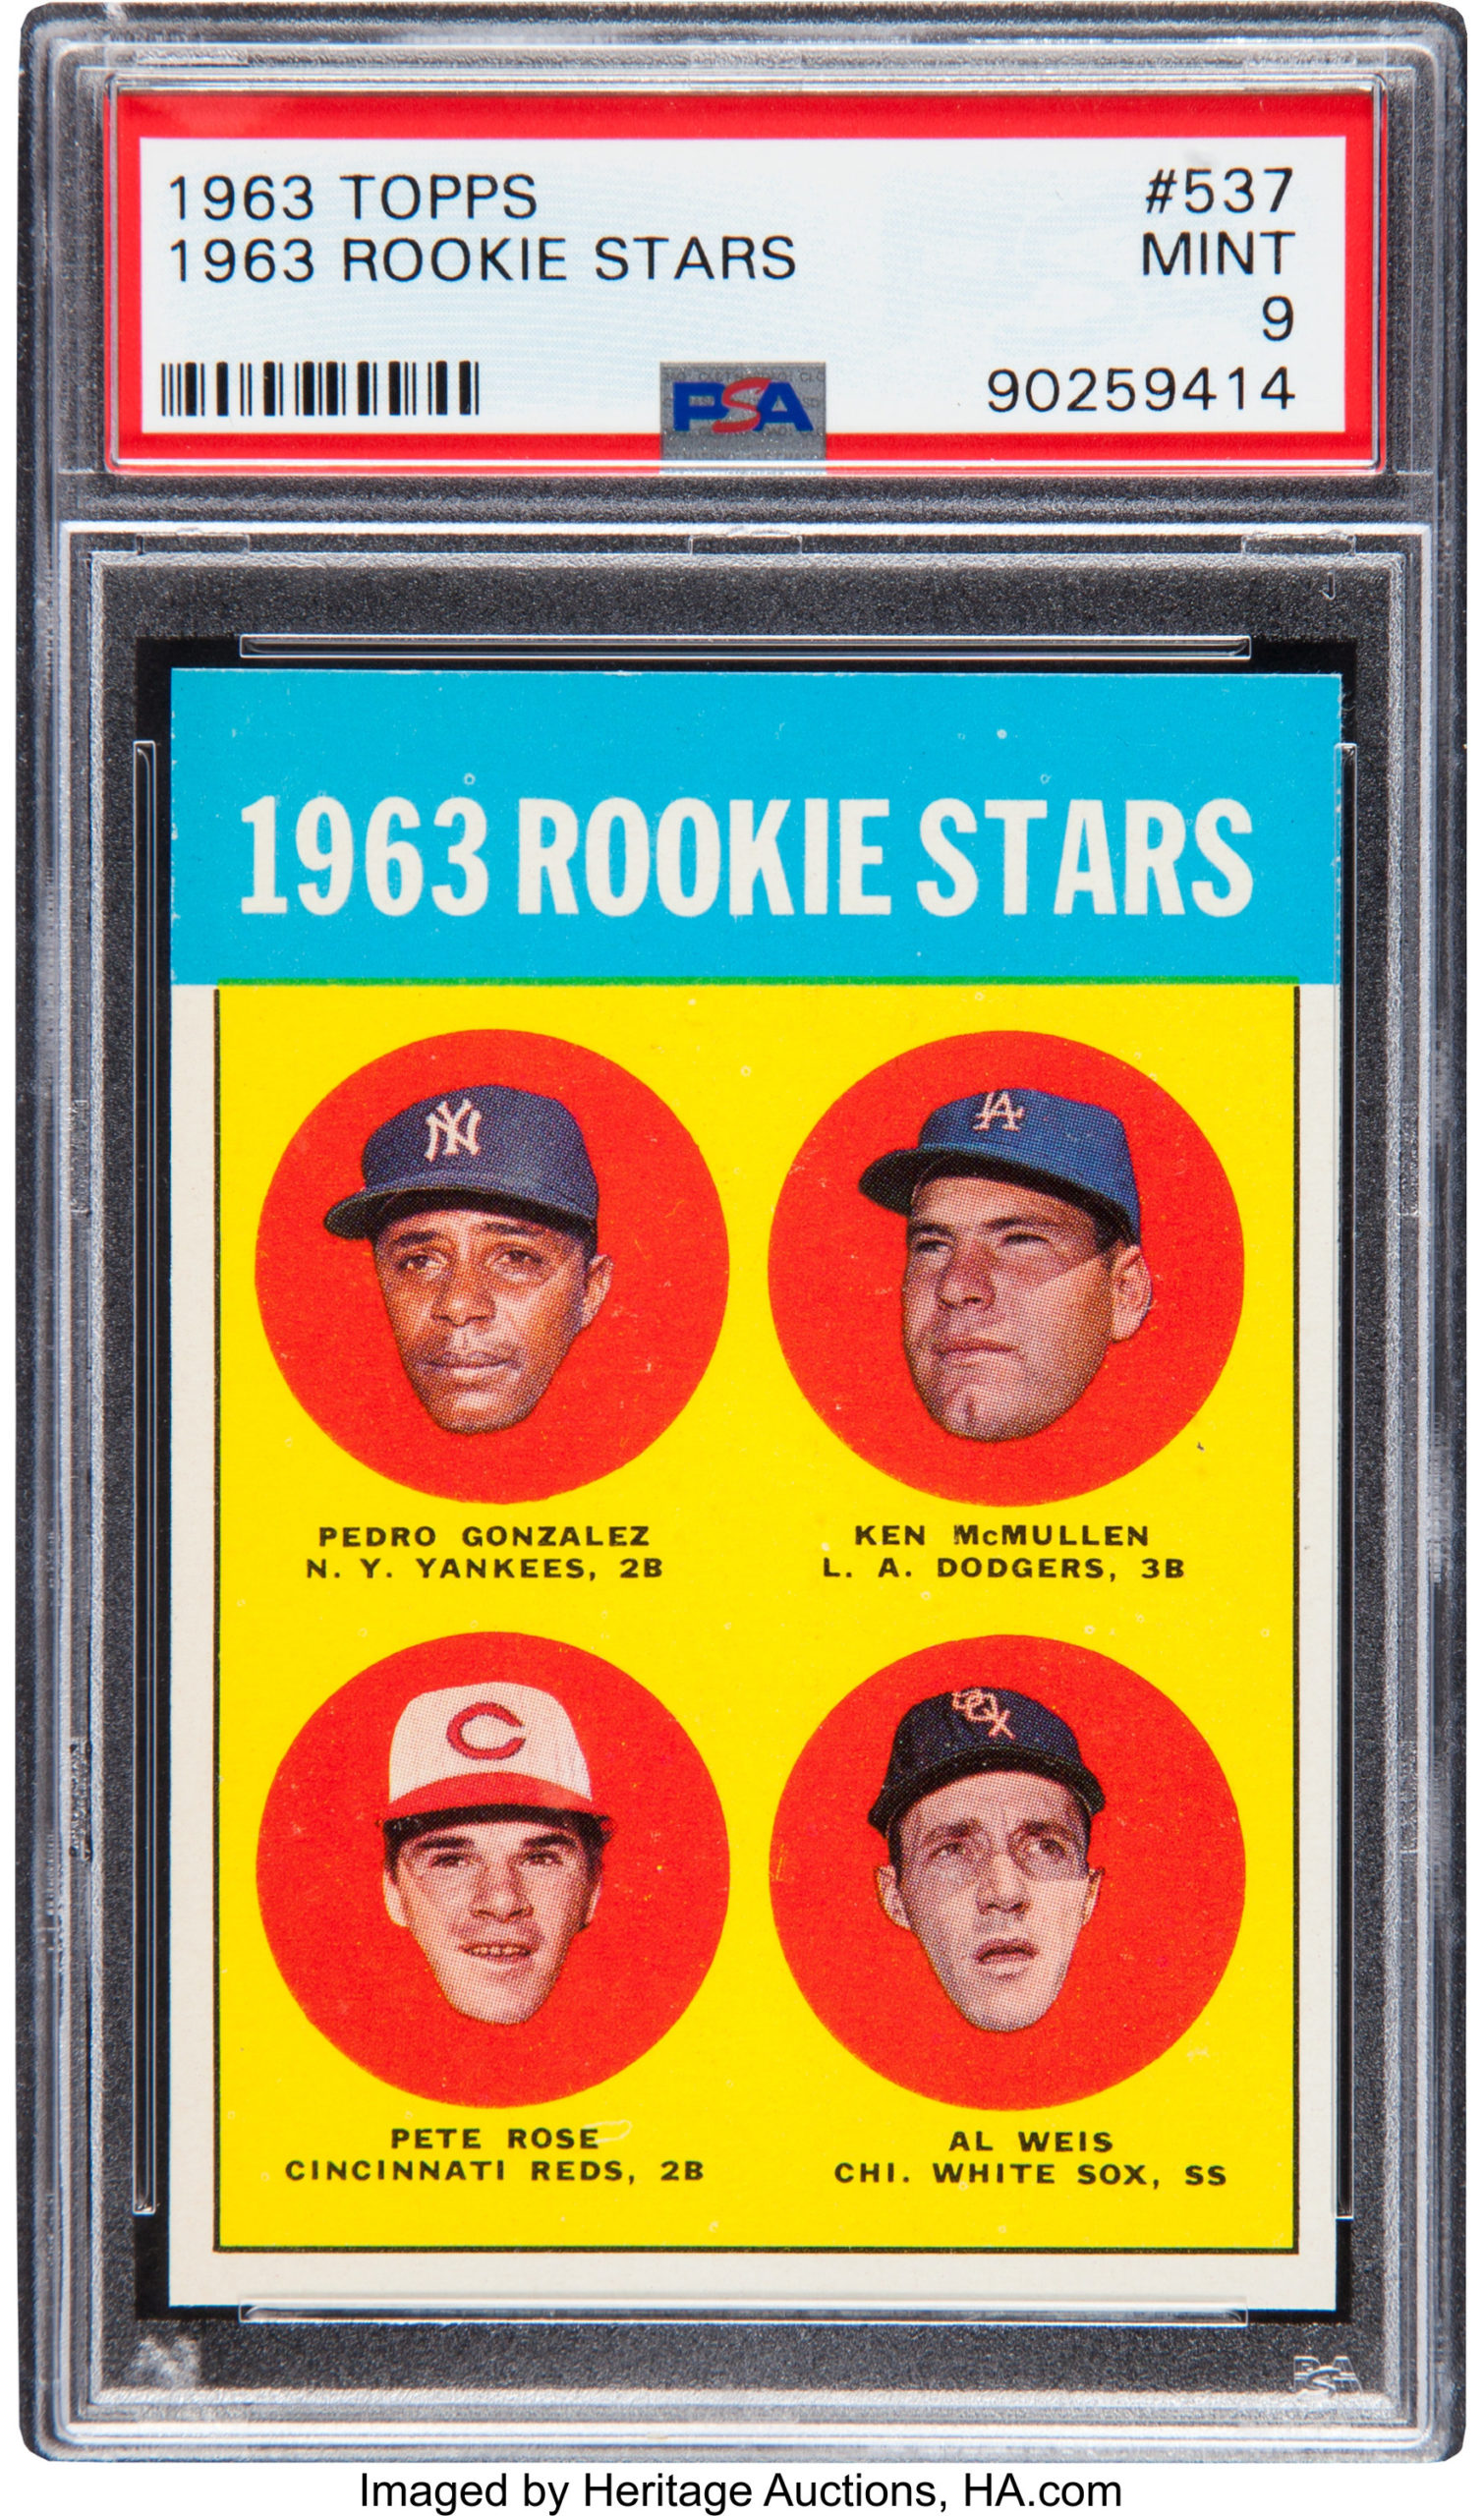 Who Is Featured on The Most Expensive Baseball Card Ever Sold at Auction?